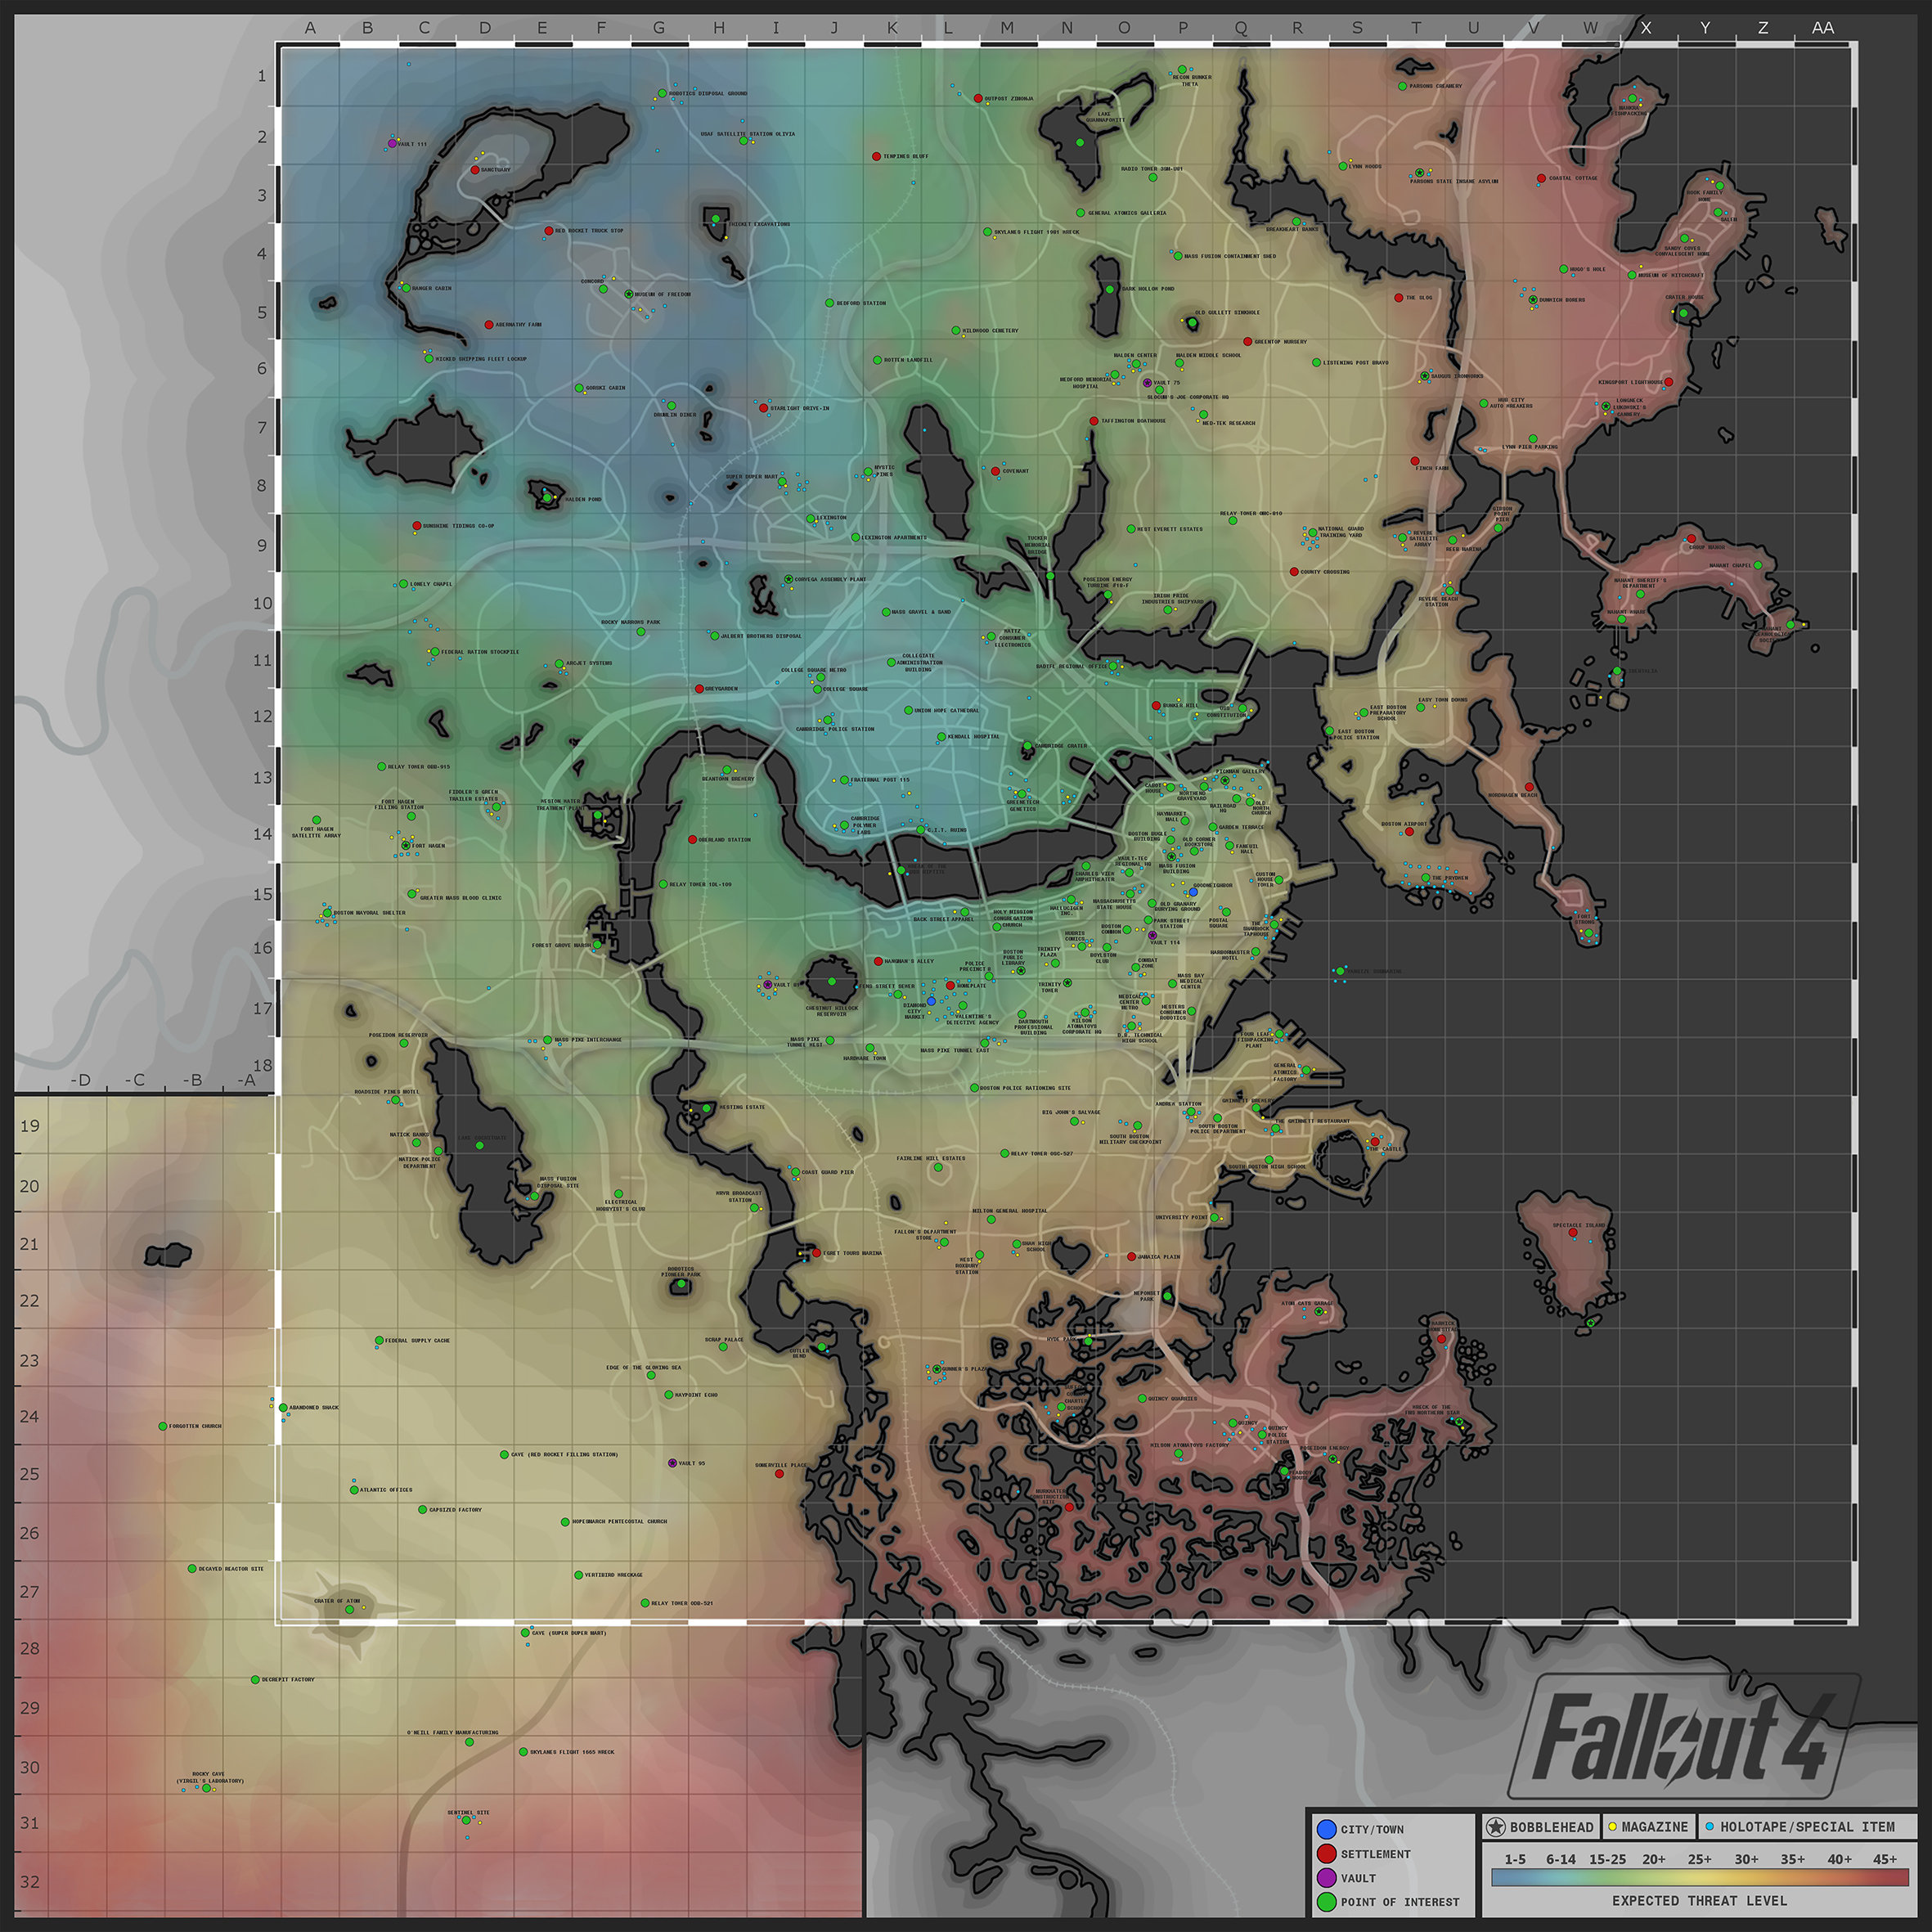 Photo New Vegas world map in the album Fan Art by Brother None